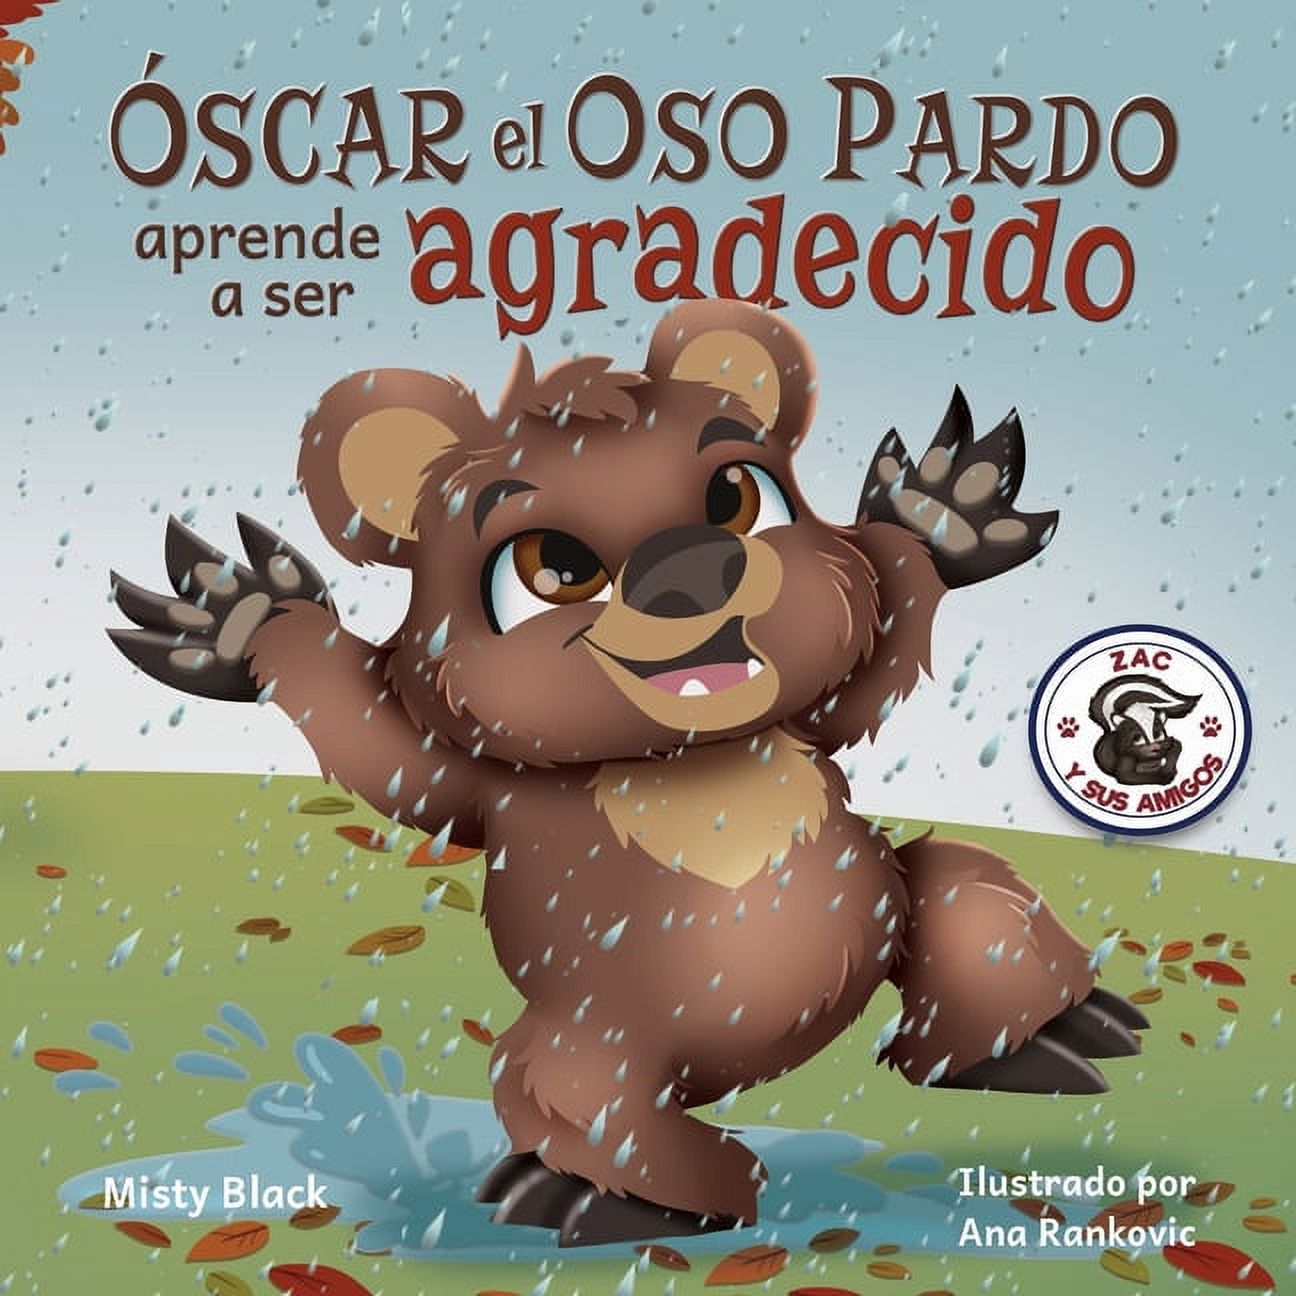 Zac E Sus Amigos: ¿Óscar el Oso aprenderá a ser agradecido?: Can Grunt the Grizzly Learn to Be Grateful? (Spanish Edition) (Paperback) - image 1 of 1